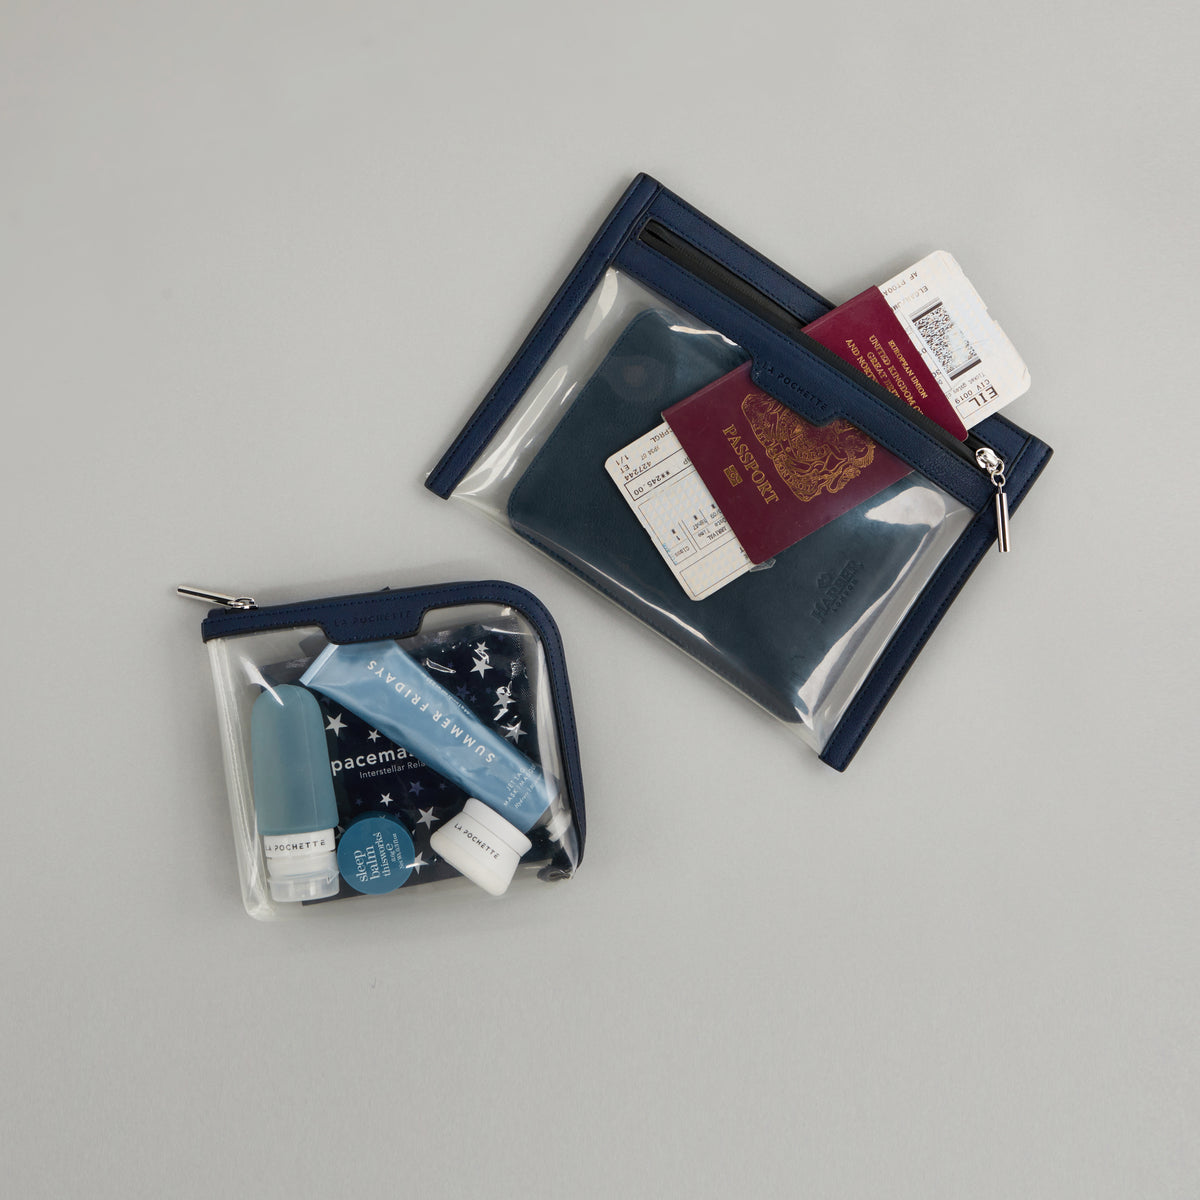 Small Anywhere Everywhere Pouch in Midnight Ink colourway containing beauty acessories, next to Wallet Anywhere Everywhere Pouch in Midnight Ink colourway holding a passport 